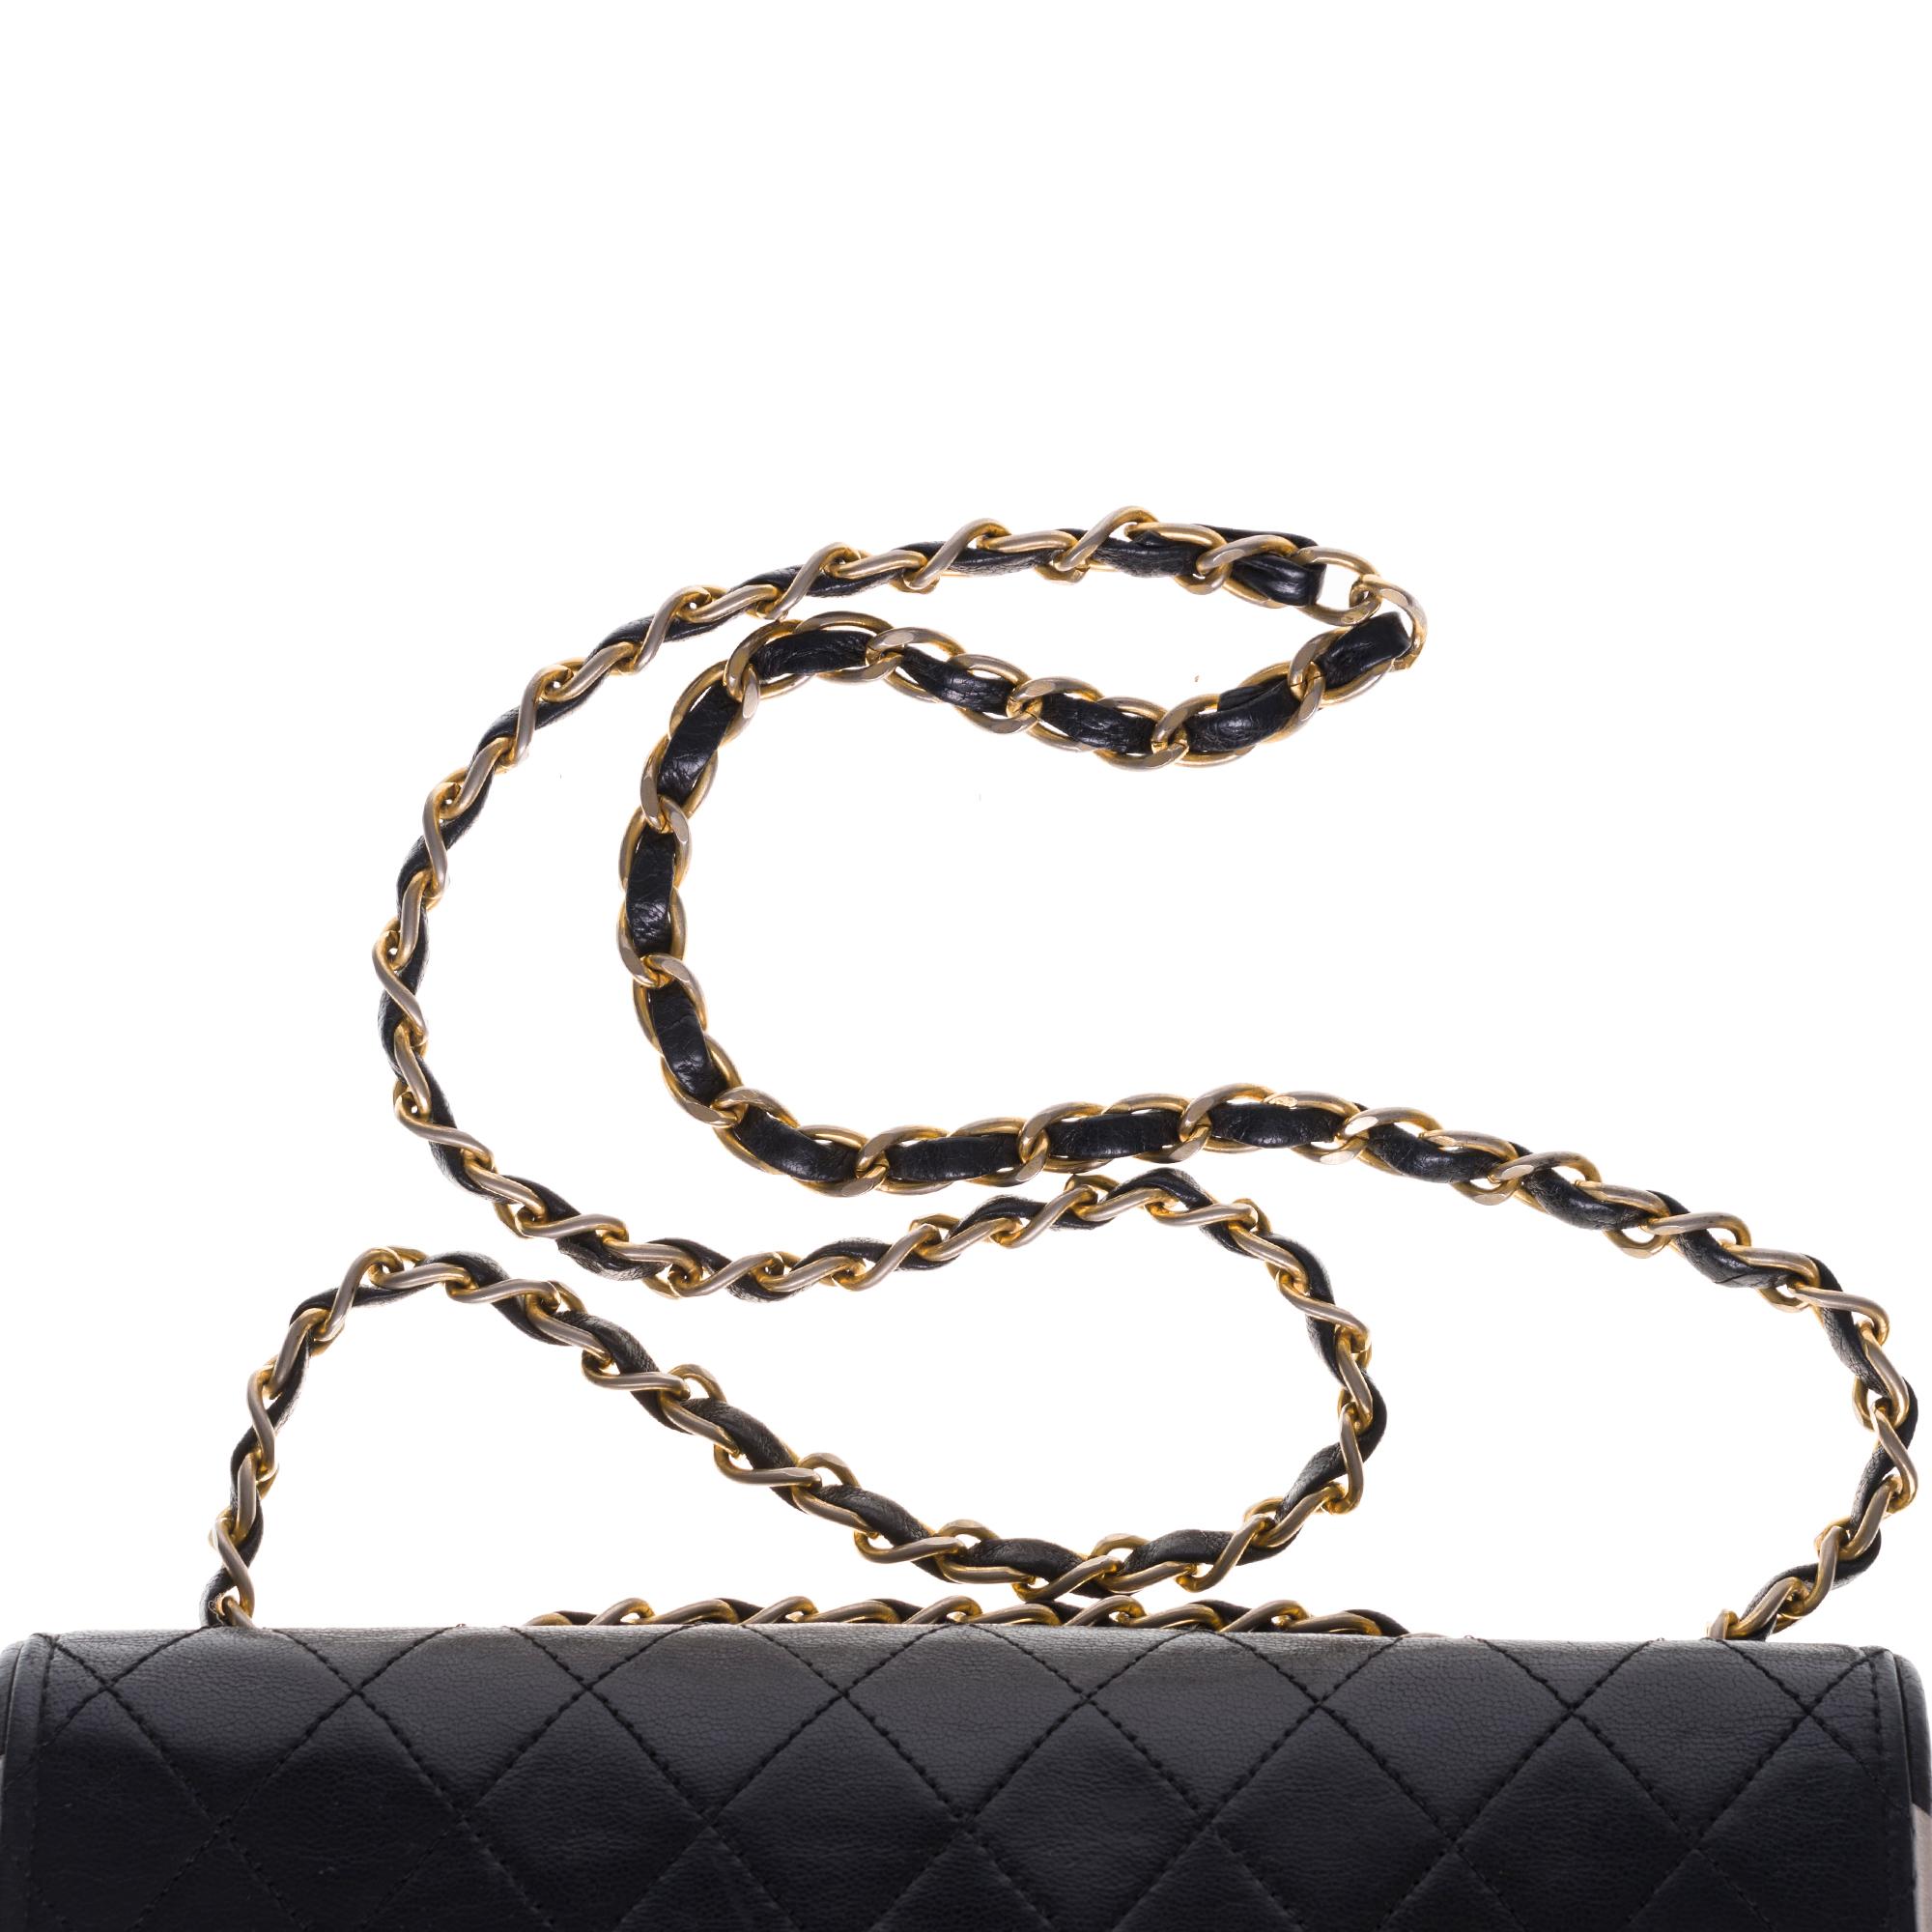 The Coveted Chanel Timeless 23cm Shoulder bag in black quilted lambskin and GHW 3